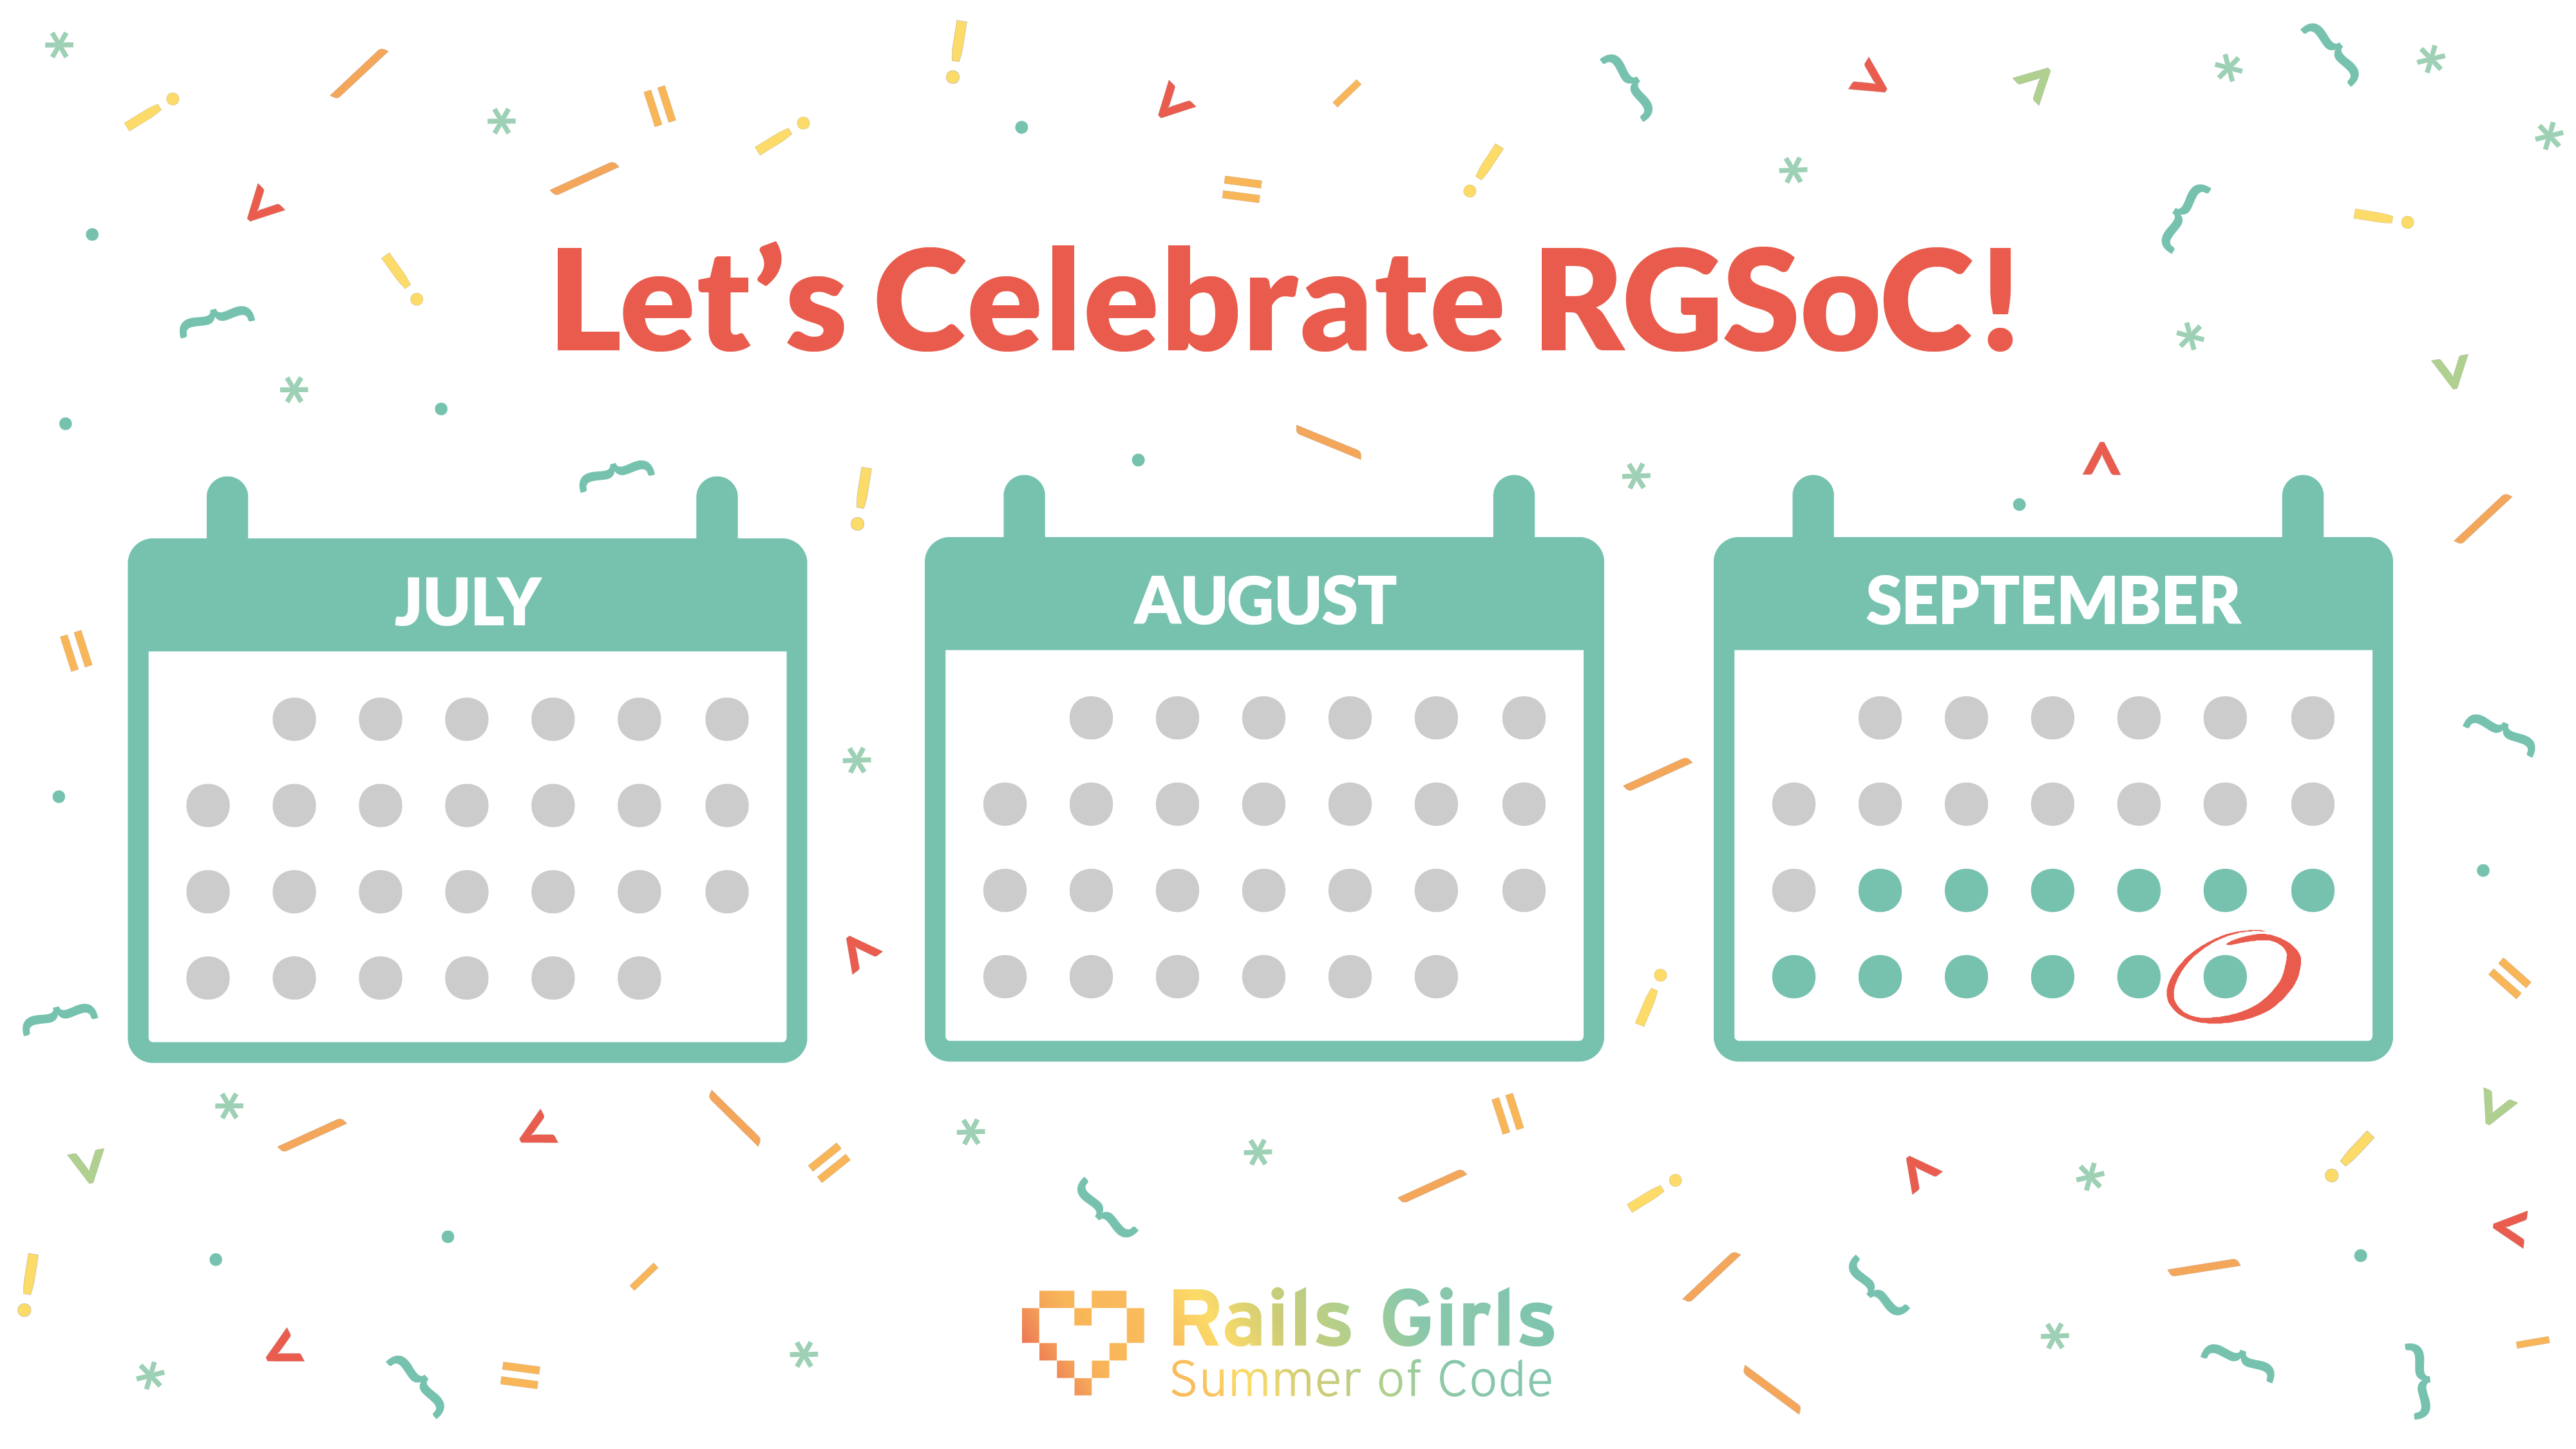 Let's celebrate RGSoC 2018 all over the world!